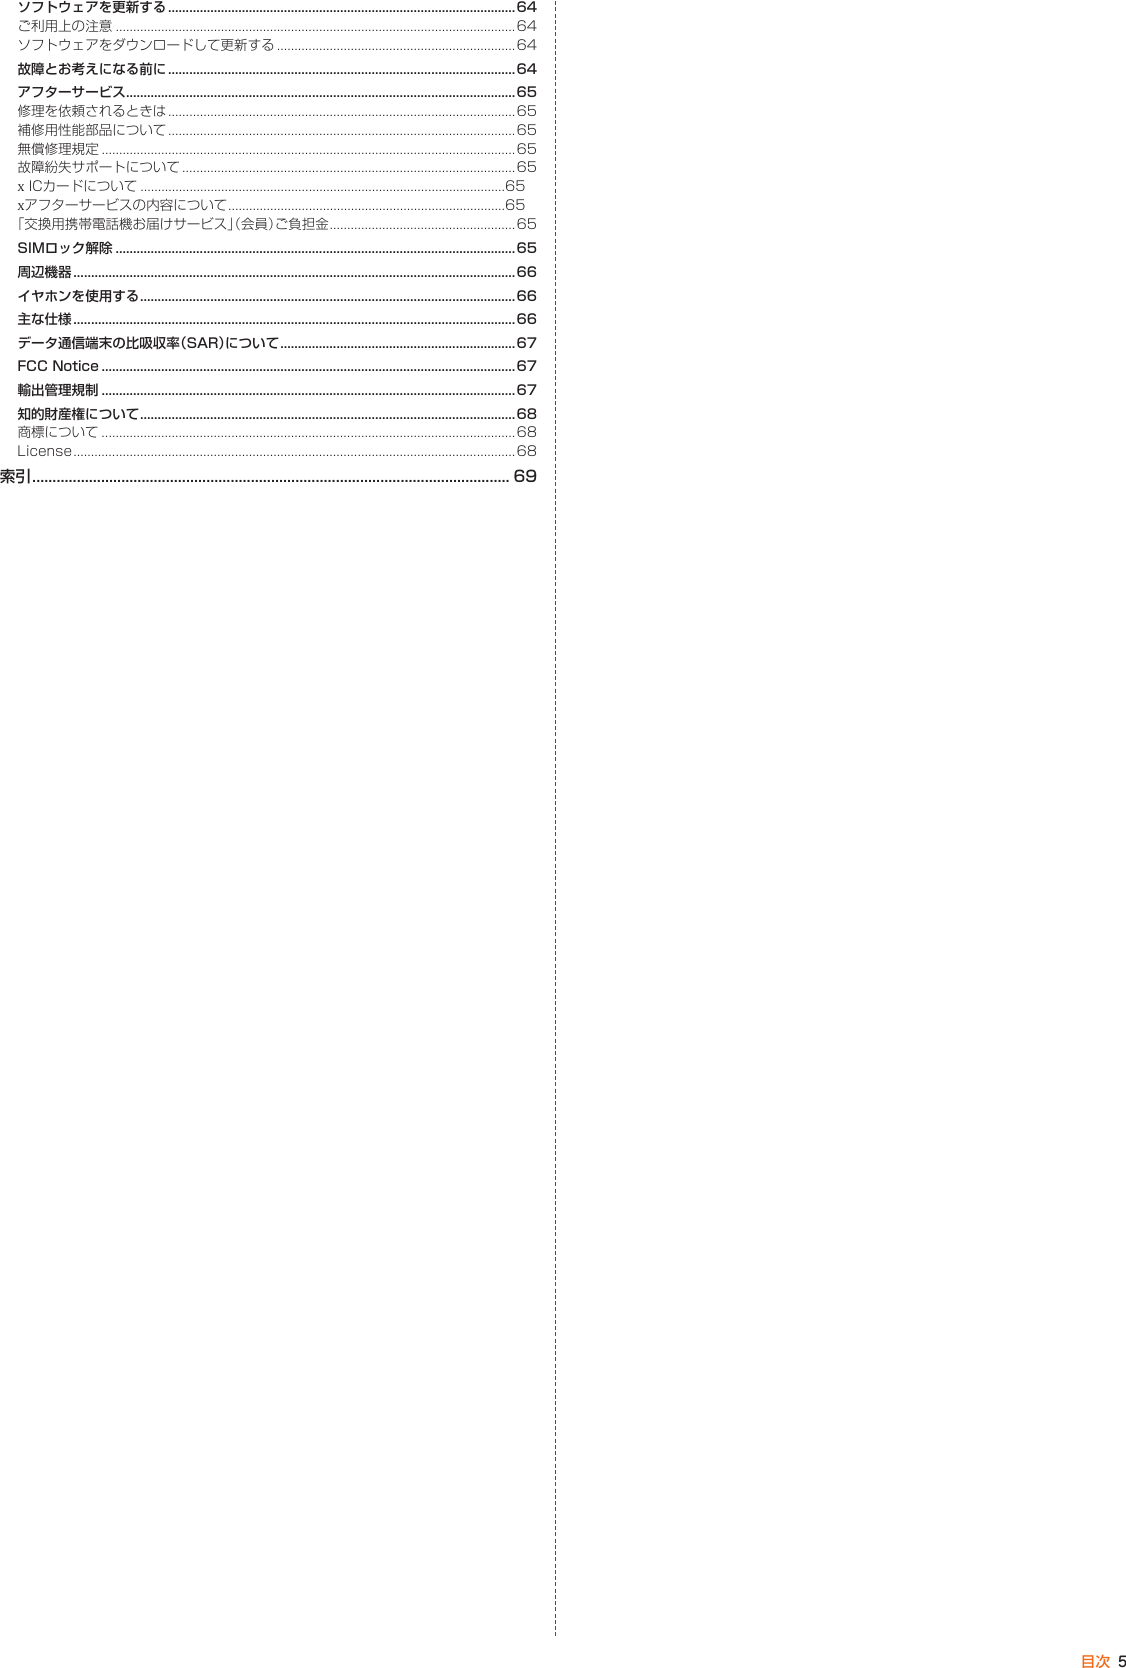 Page 6 of Kyocera FA51 Tablet User Manual part 2